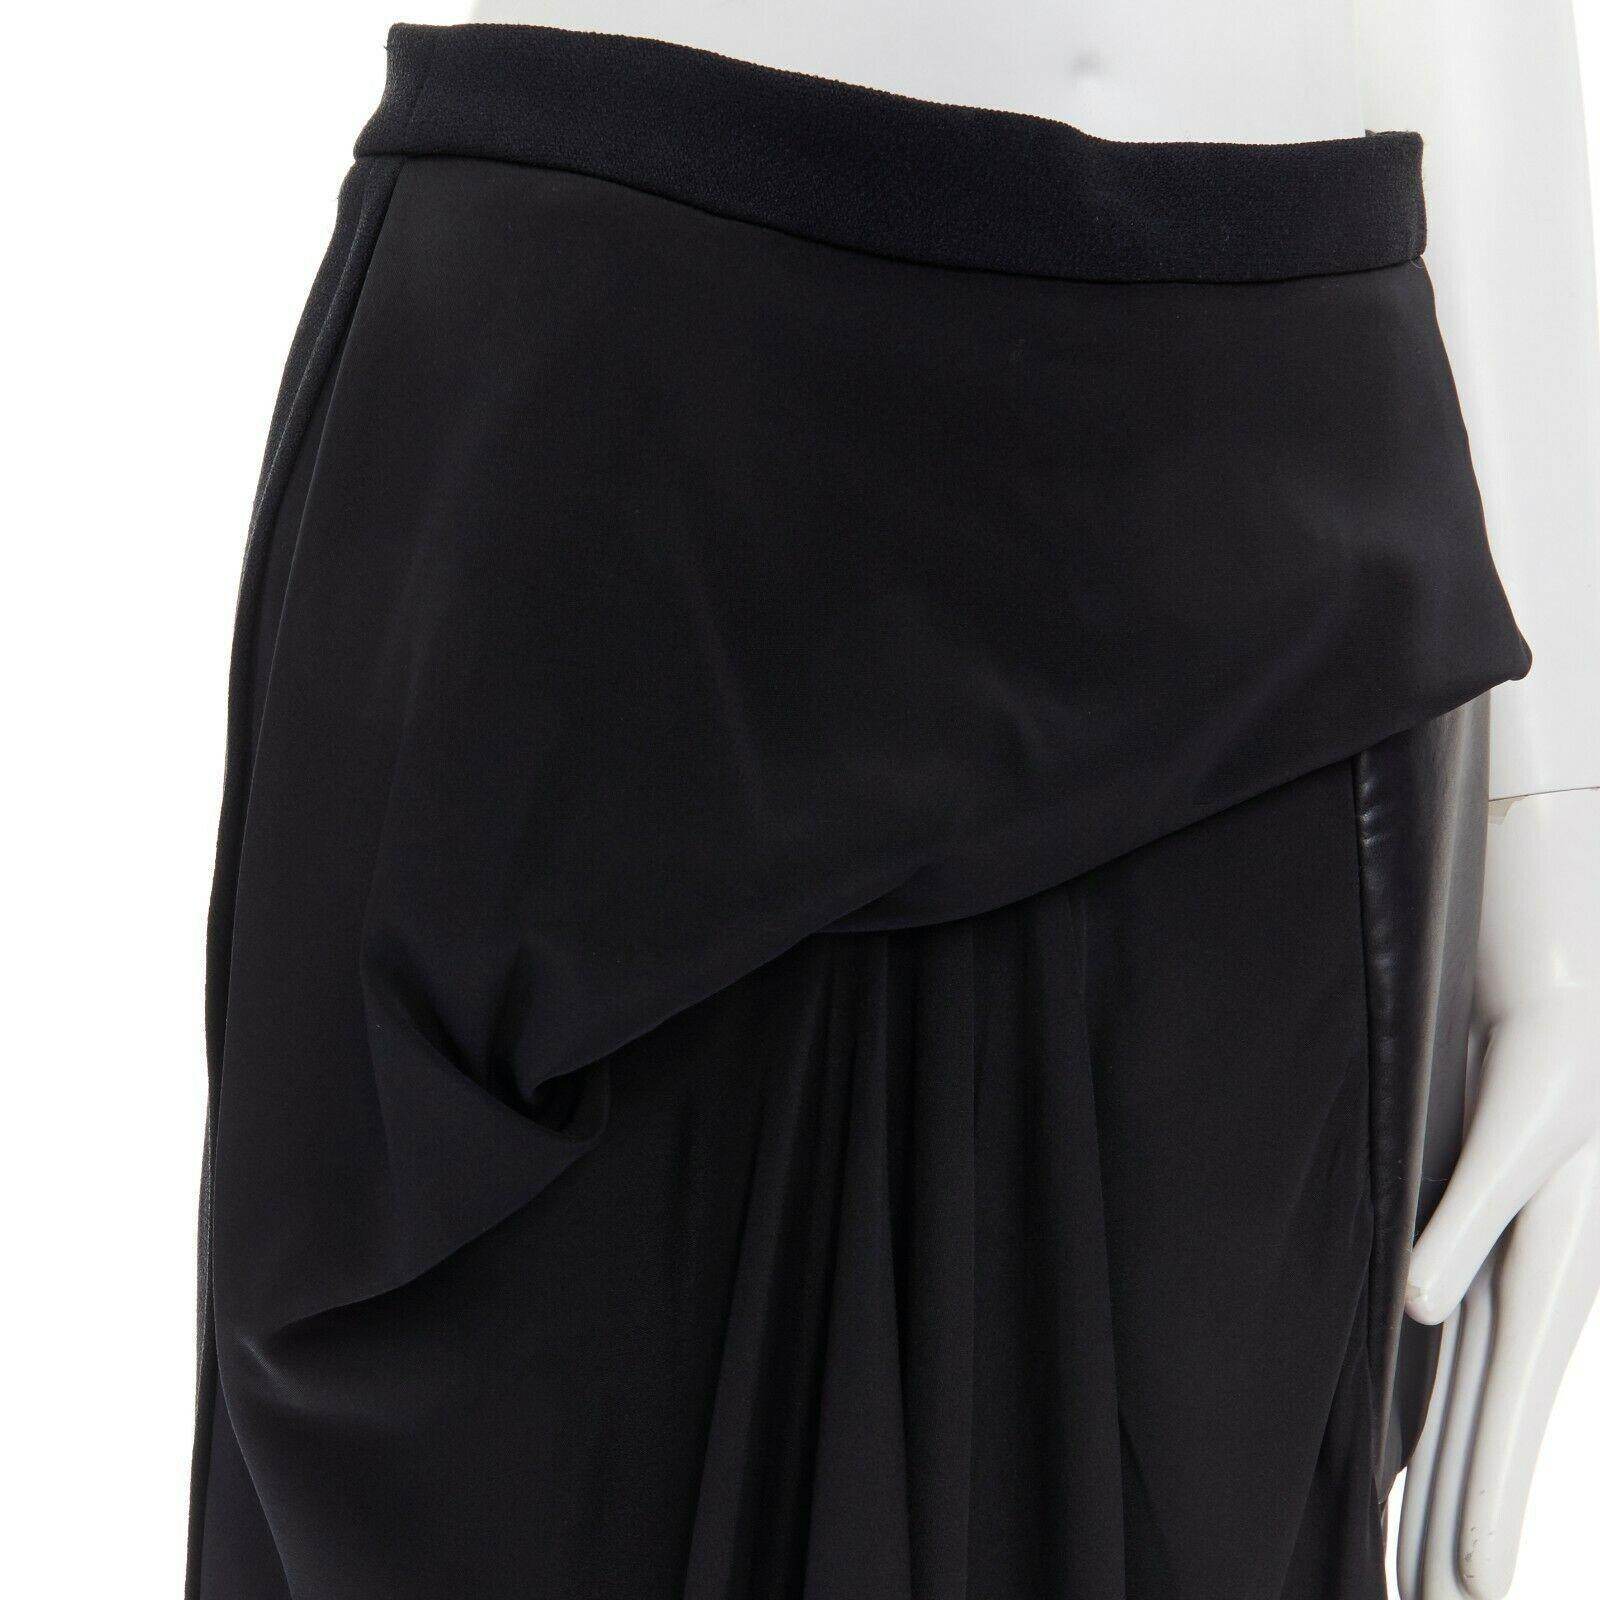 runway BALENCIAGA GHESQUIERE AW11 black faux leather panel skirt FR36 US4 UK8 S 1